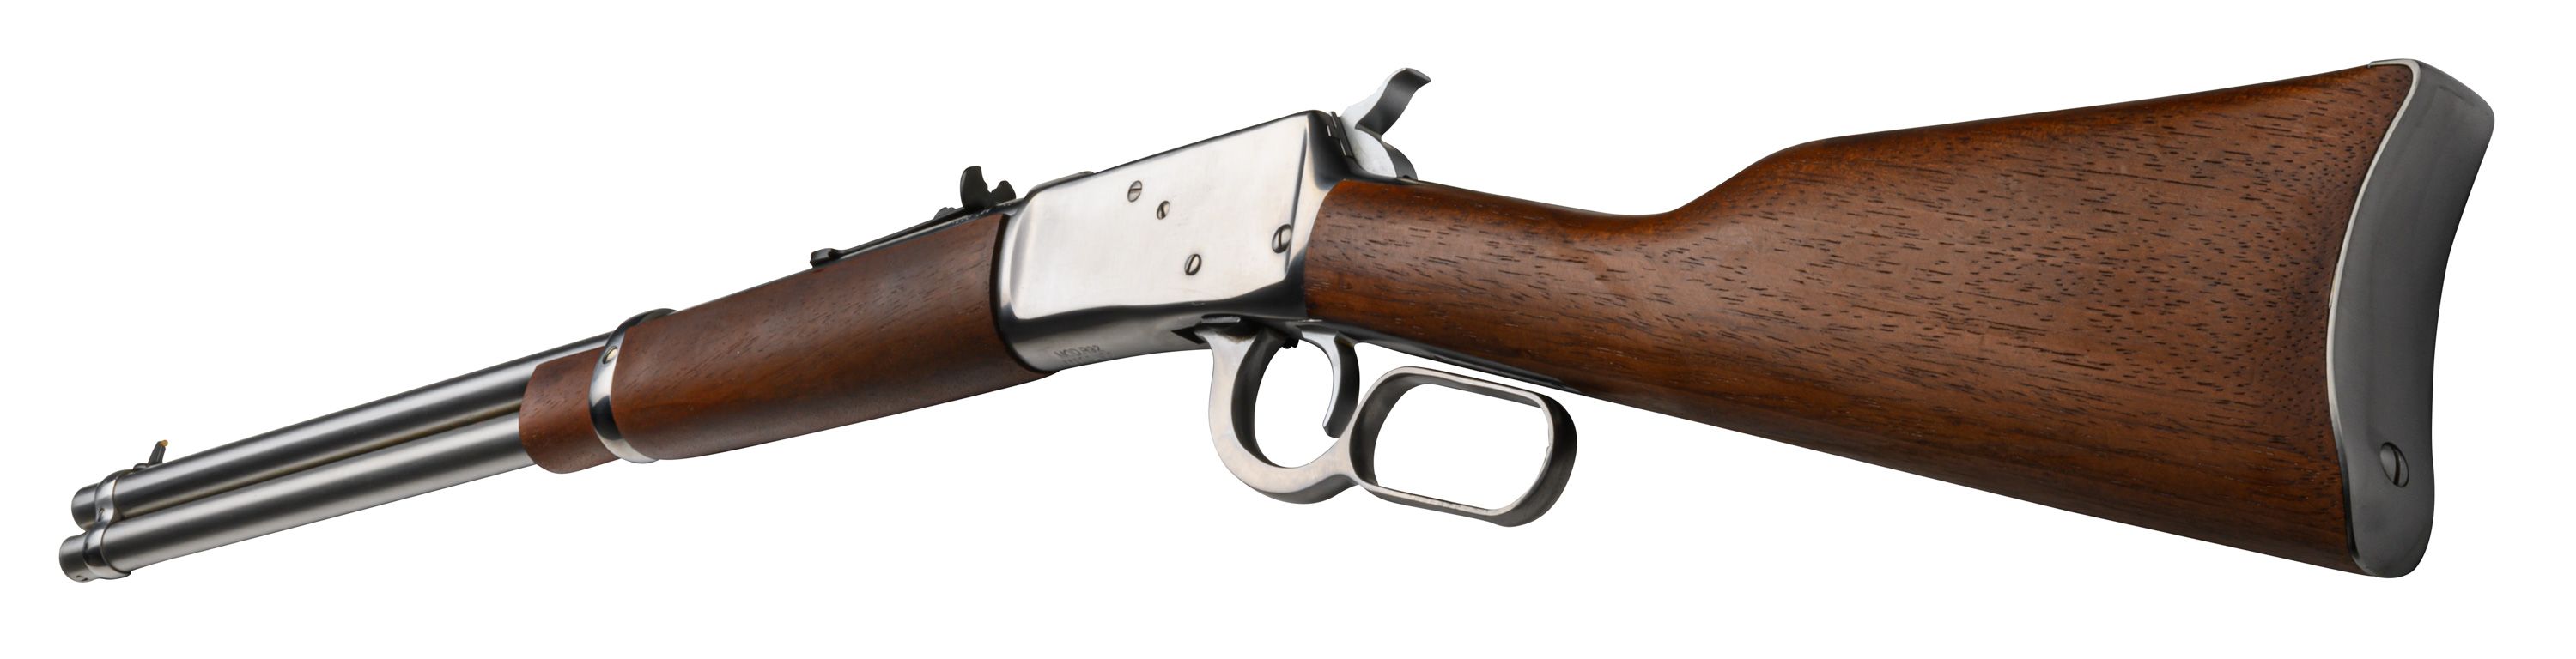 R92 Hardwood, .44 MAG, Polished Stainless, 20 In.